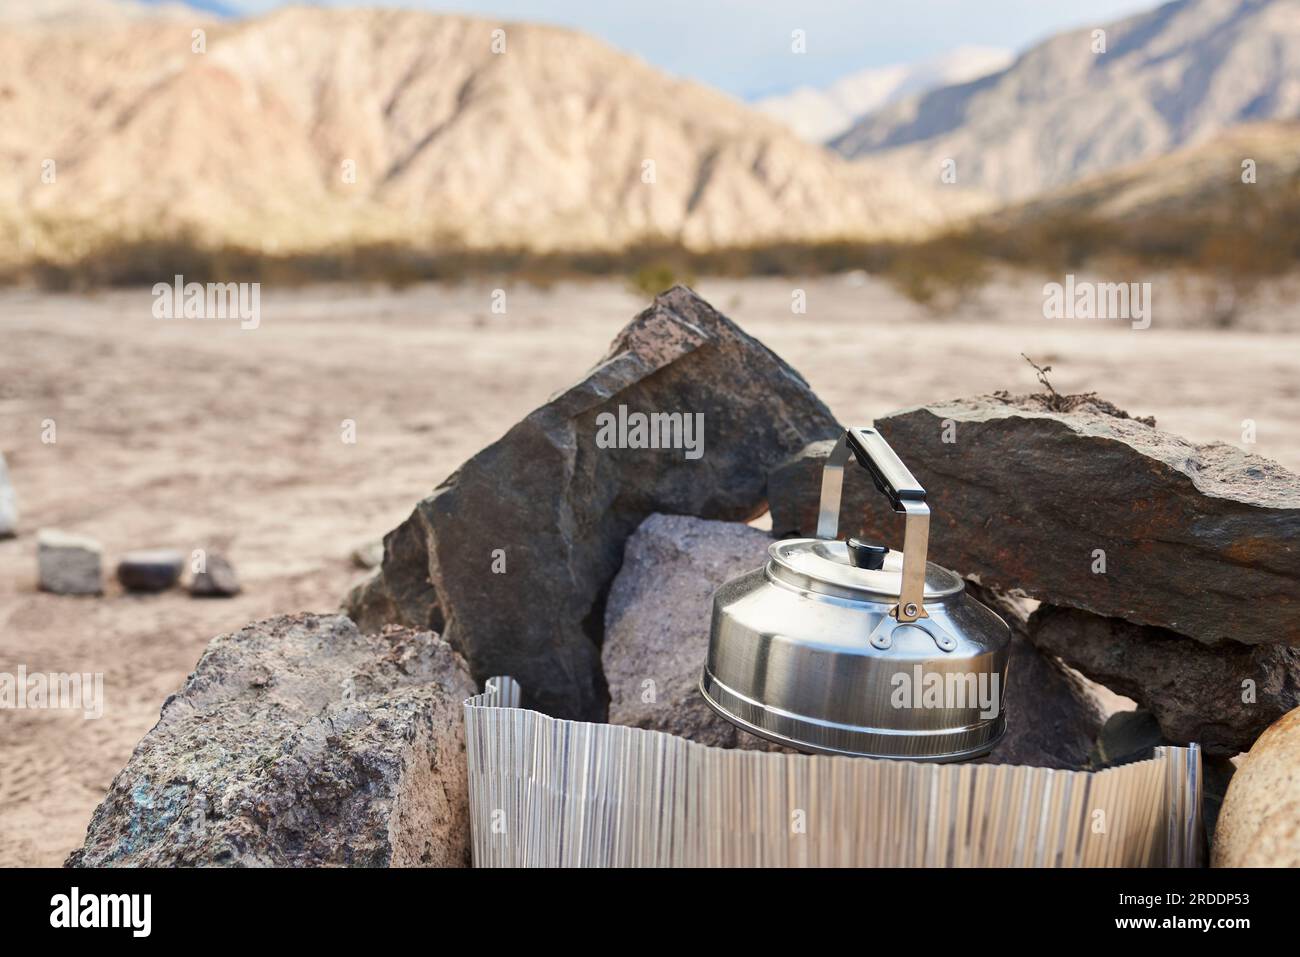 Heating water in a kettle placed in a heater sheltered from the wind in a camp in the mountains. Composition without people, with copy space. Stock Photo